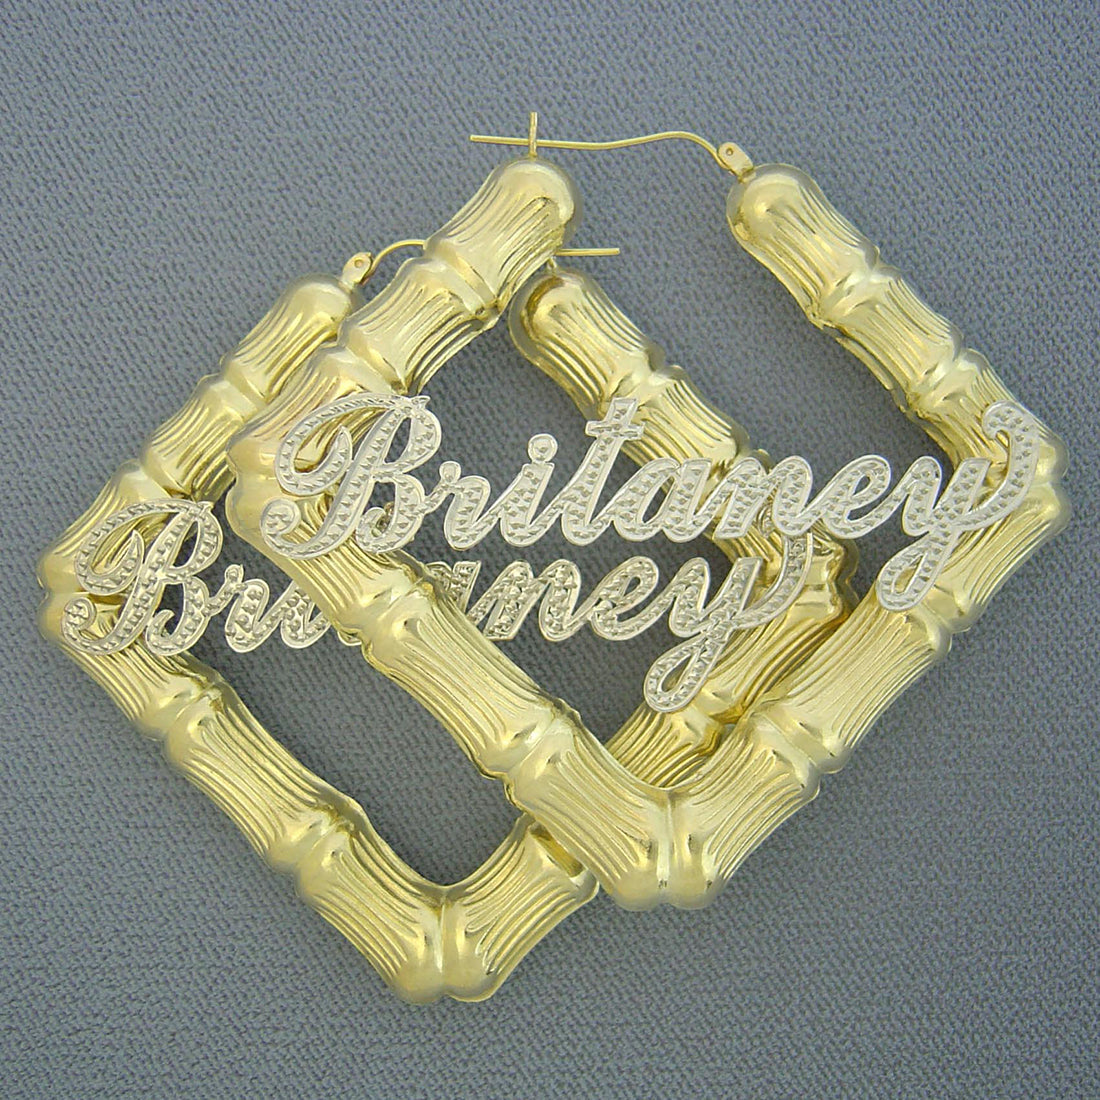 Personalized 10k Square Door Knocker Iced Out Name Bamboo Earring 2.75 Inches Wide 2 Tone Fine Jewelry